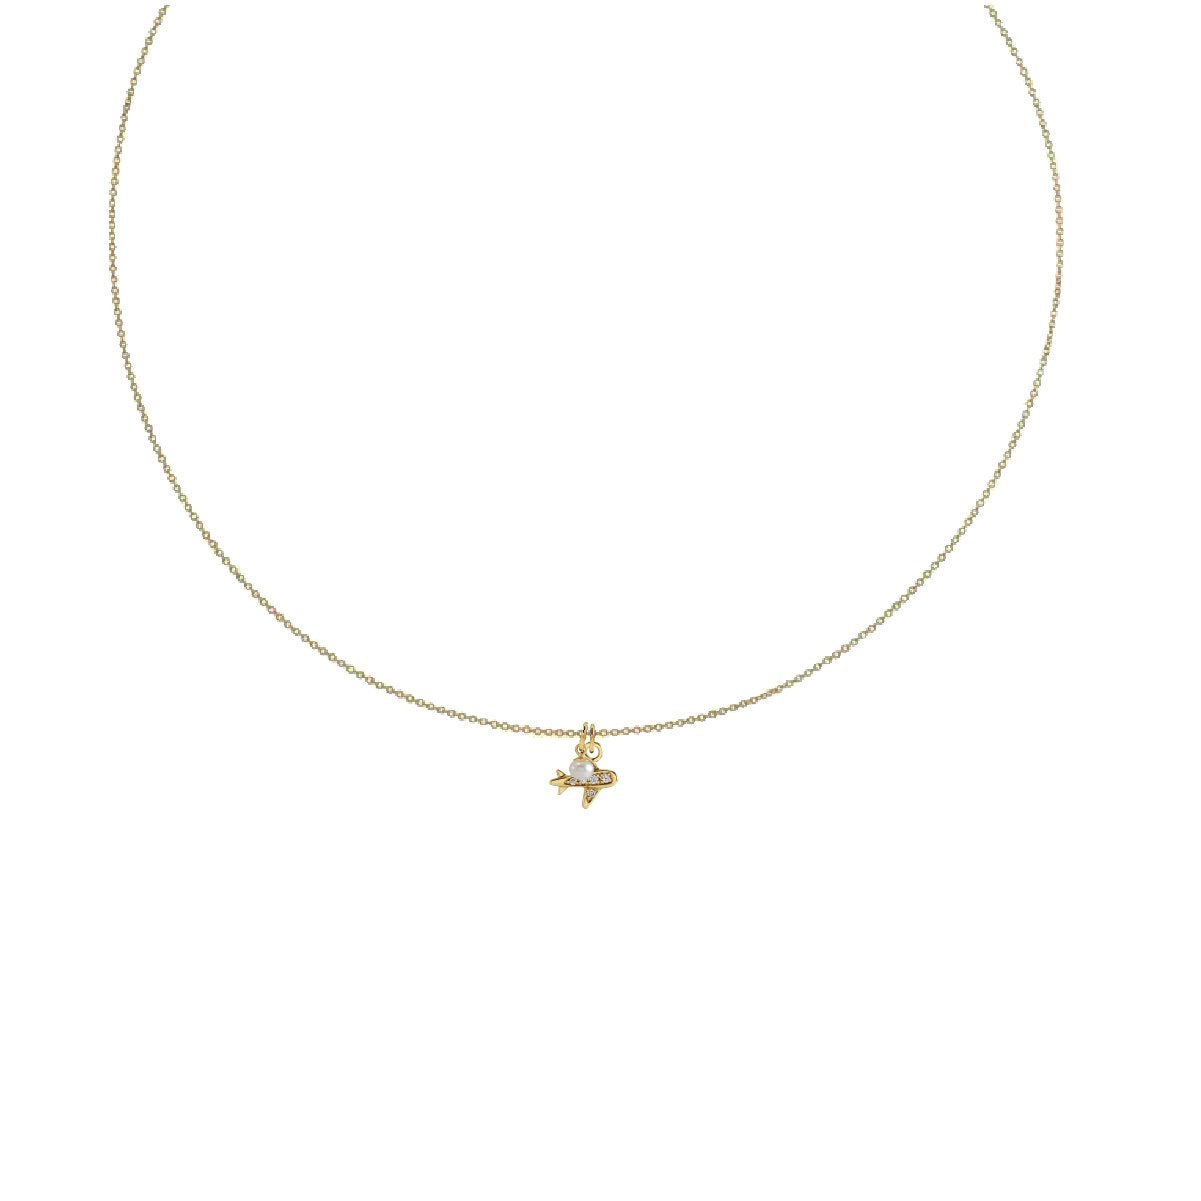 Charm Collection - For the Jet Setter Robyn Canady Charm + 14K Gold Filled Chain Add a Pearl 